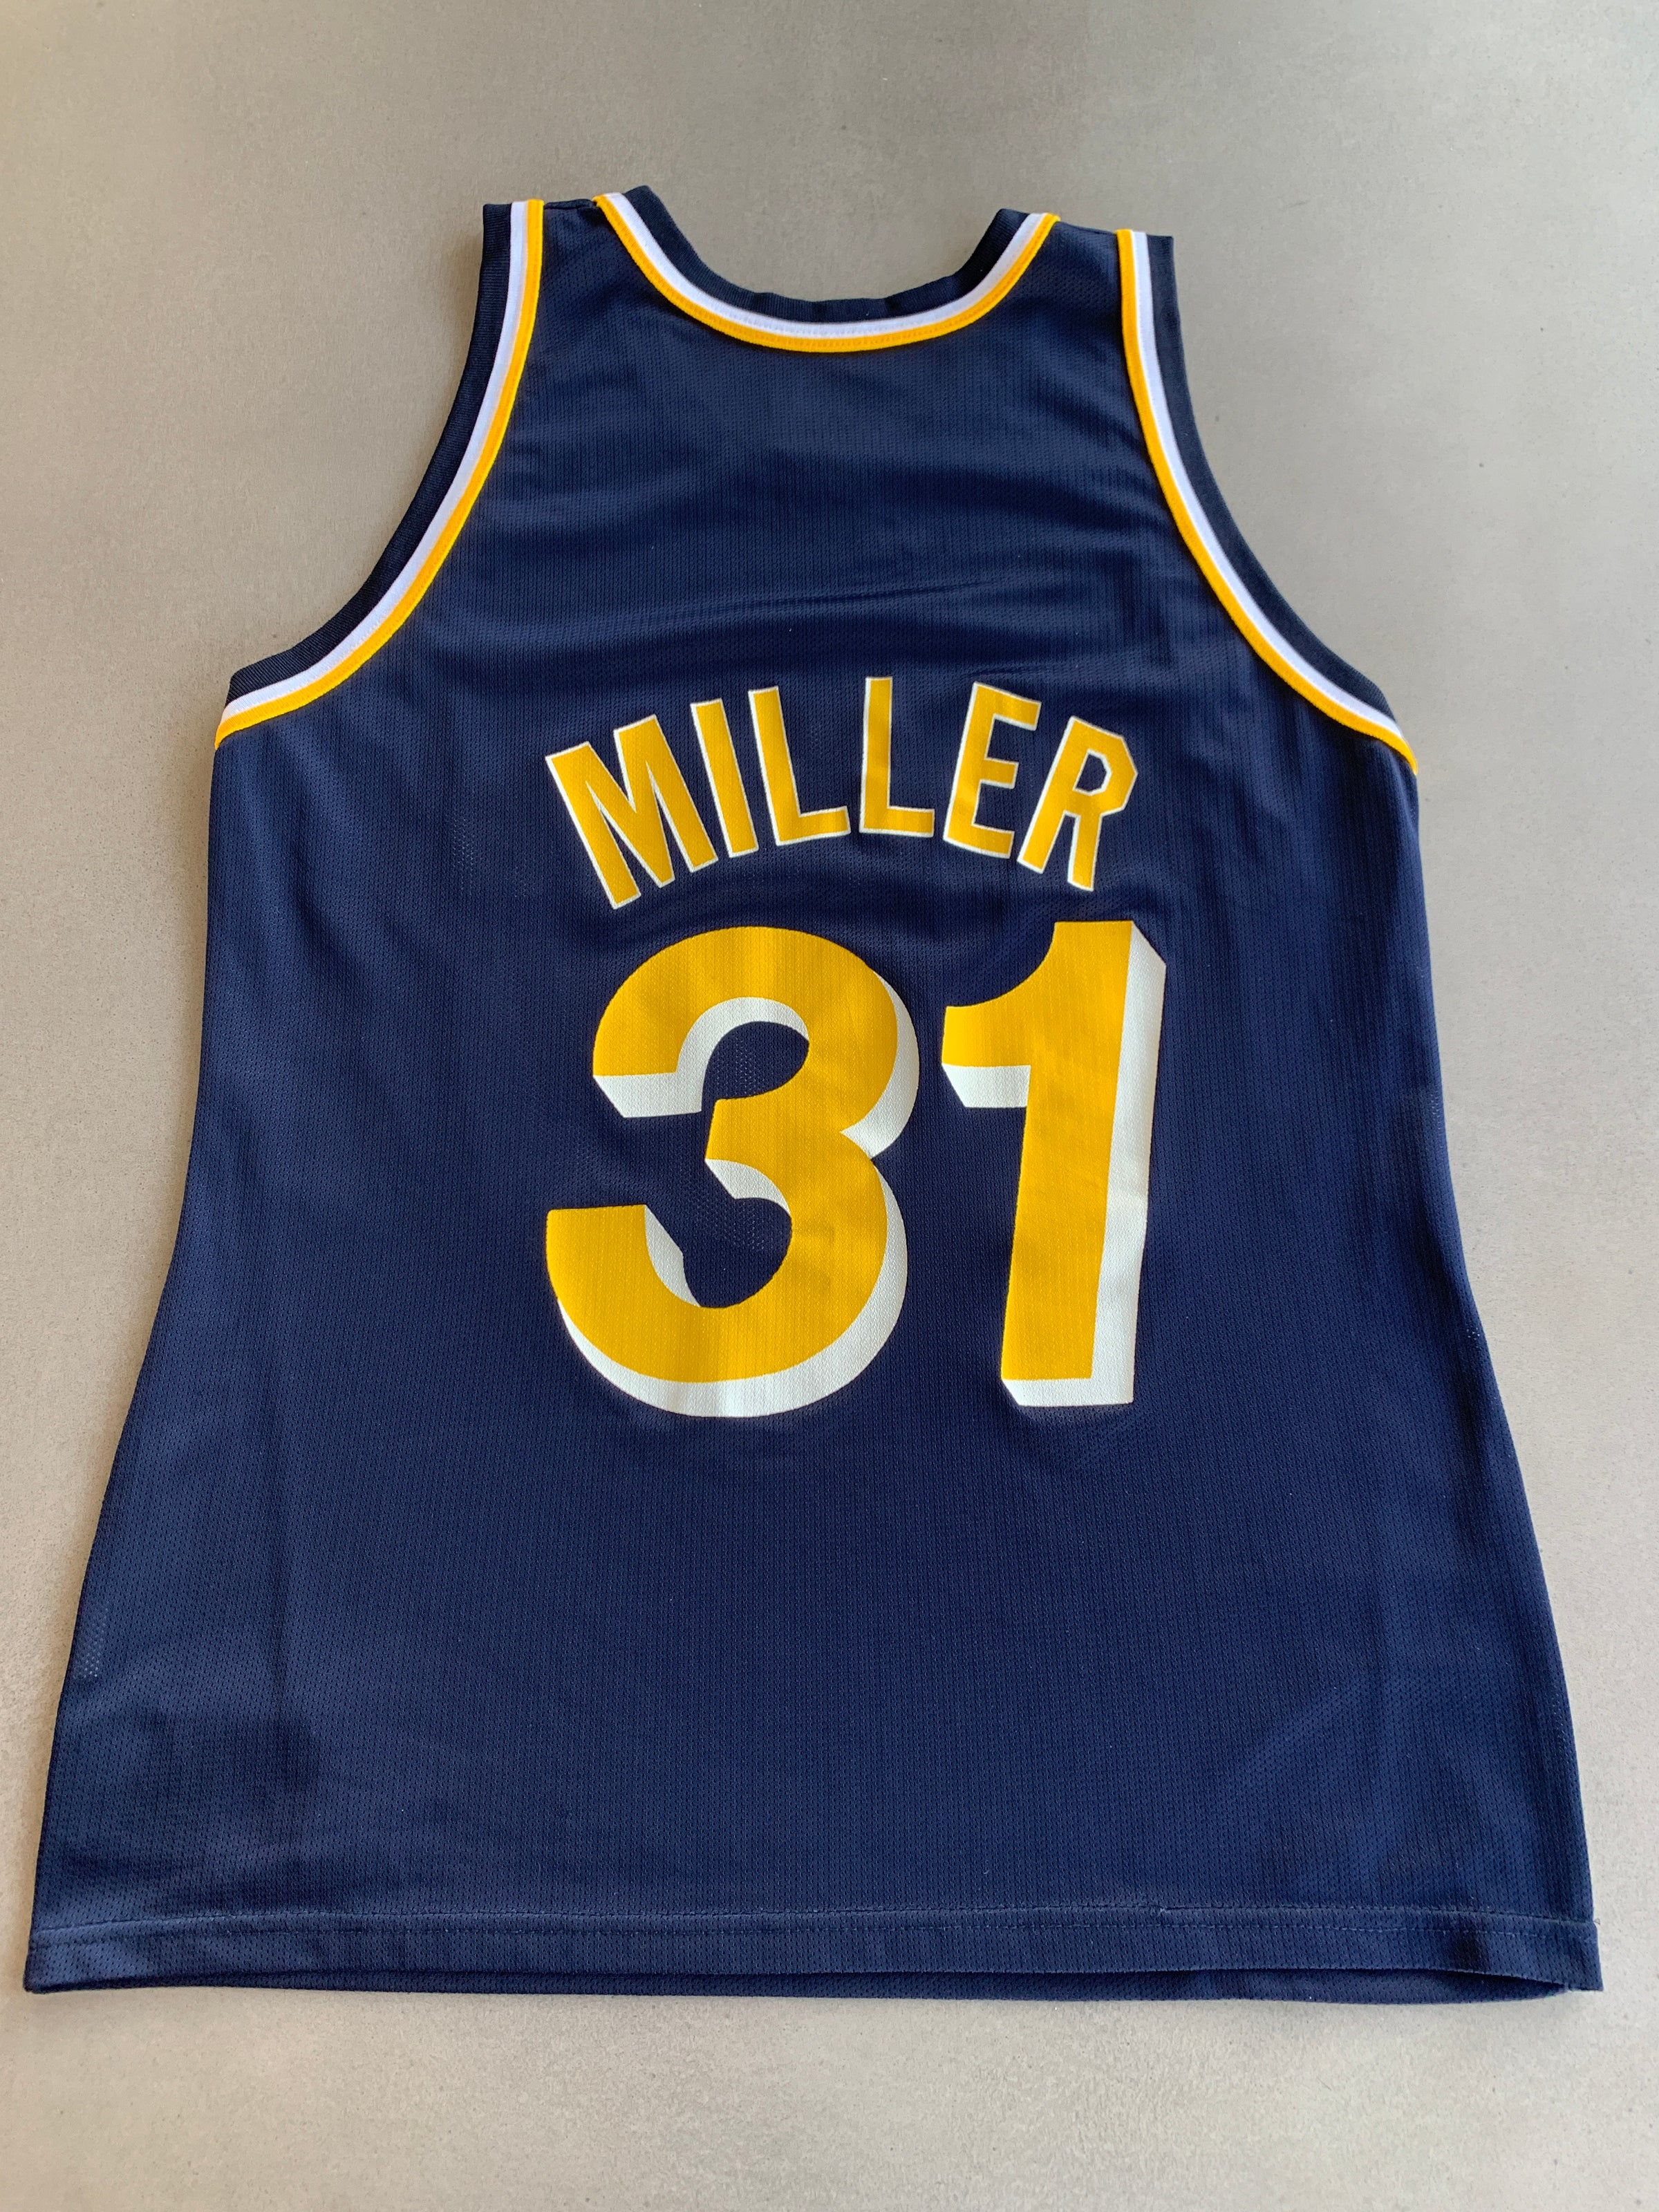 indiana pacers away jersey